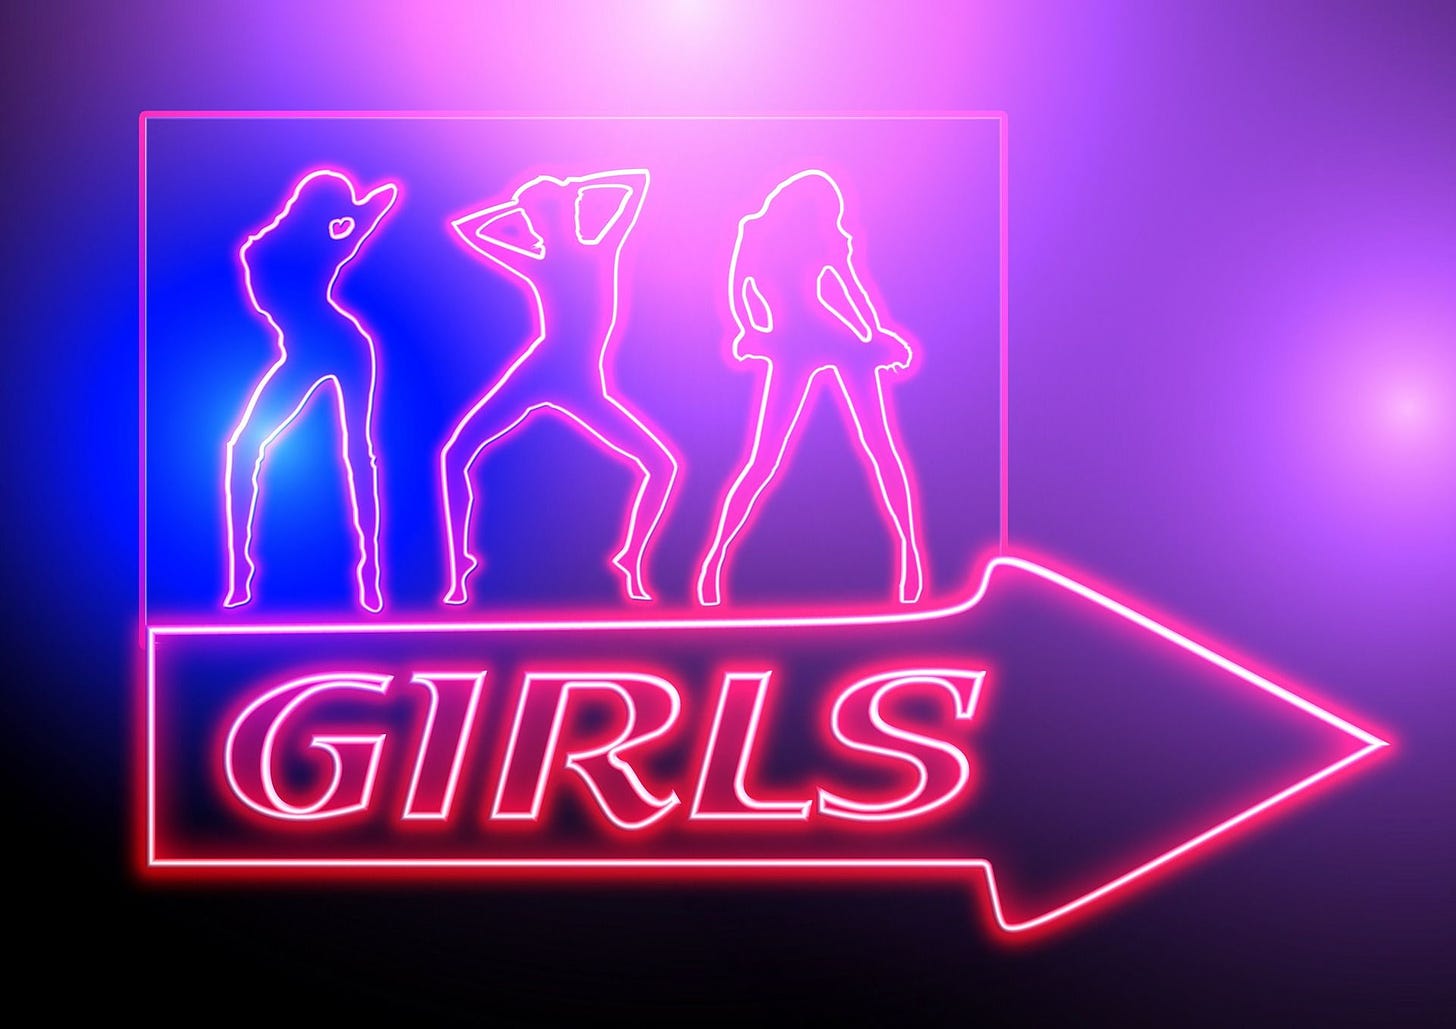 Neon Girls sign with arrow pointing to the right